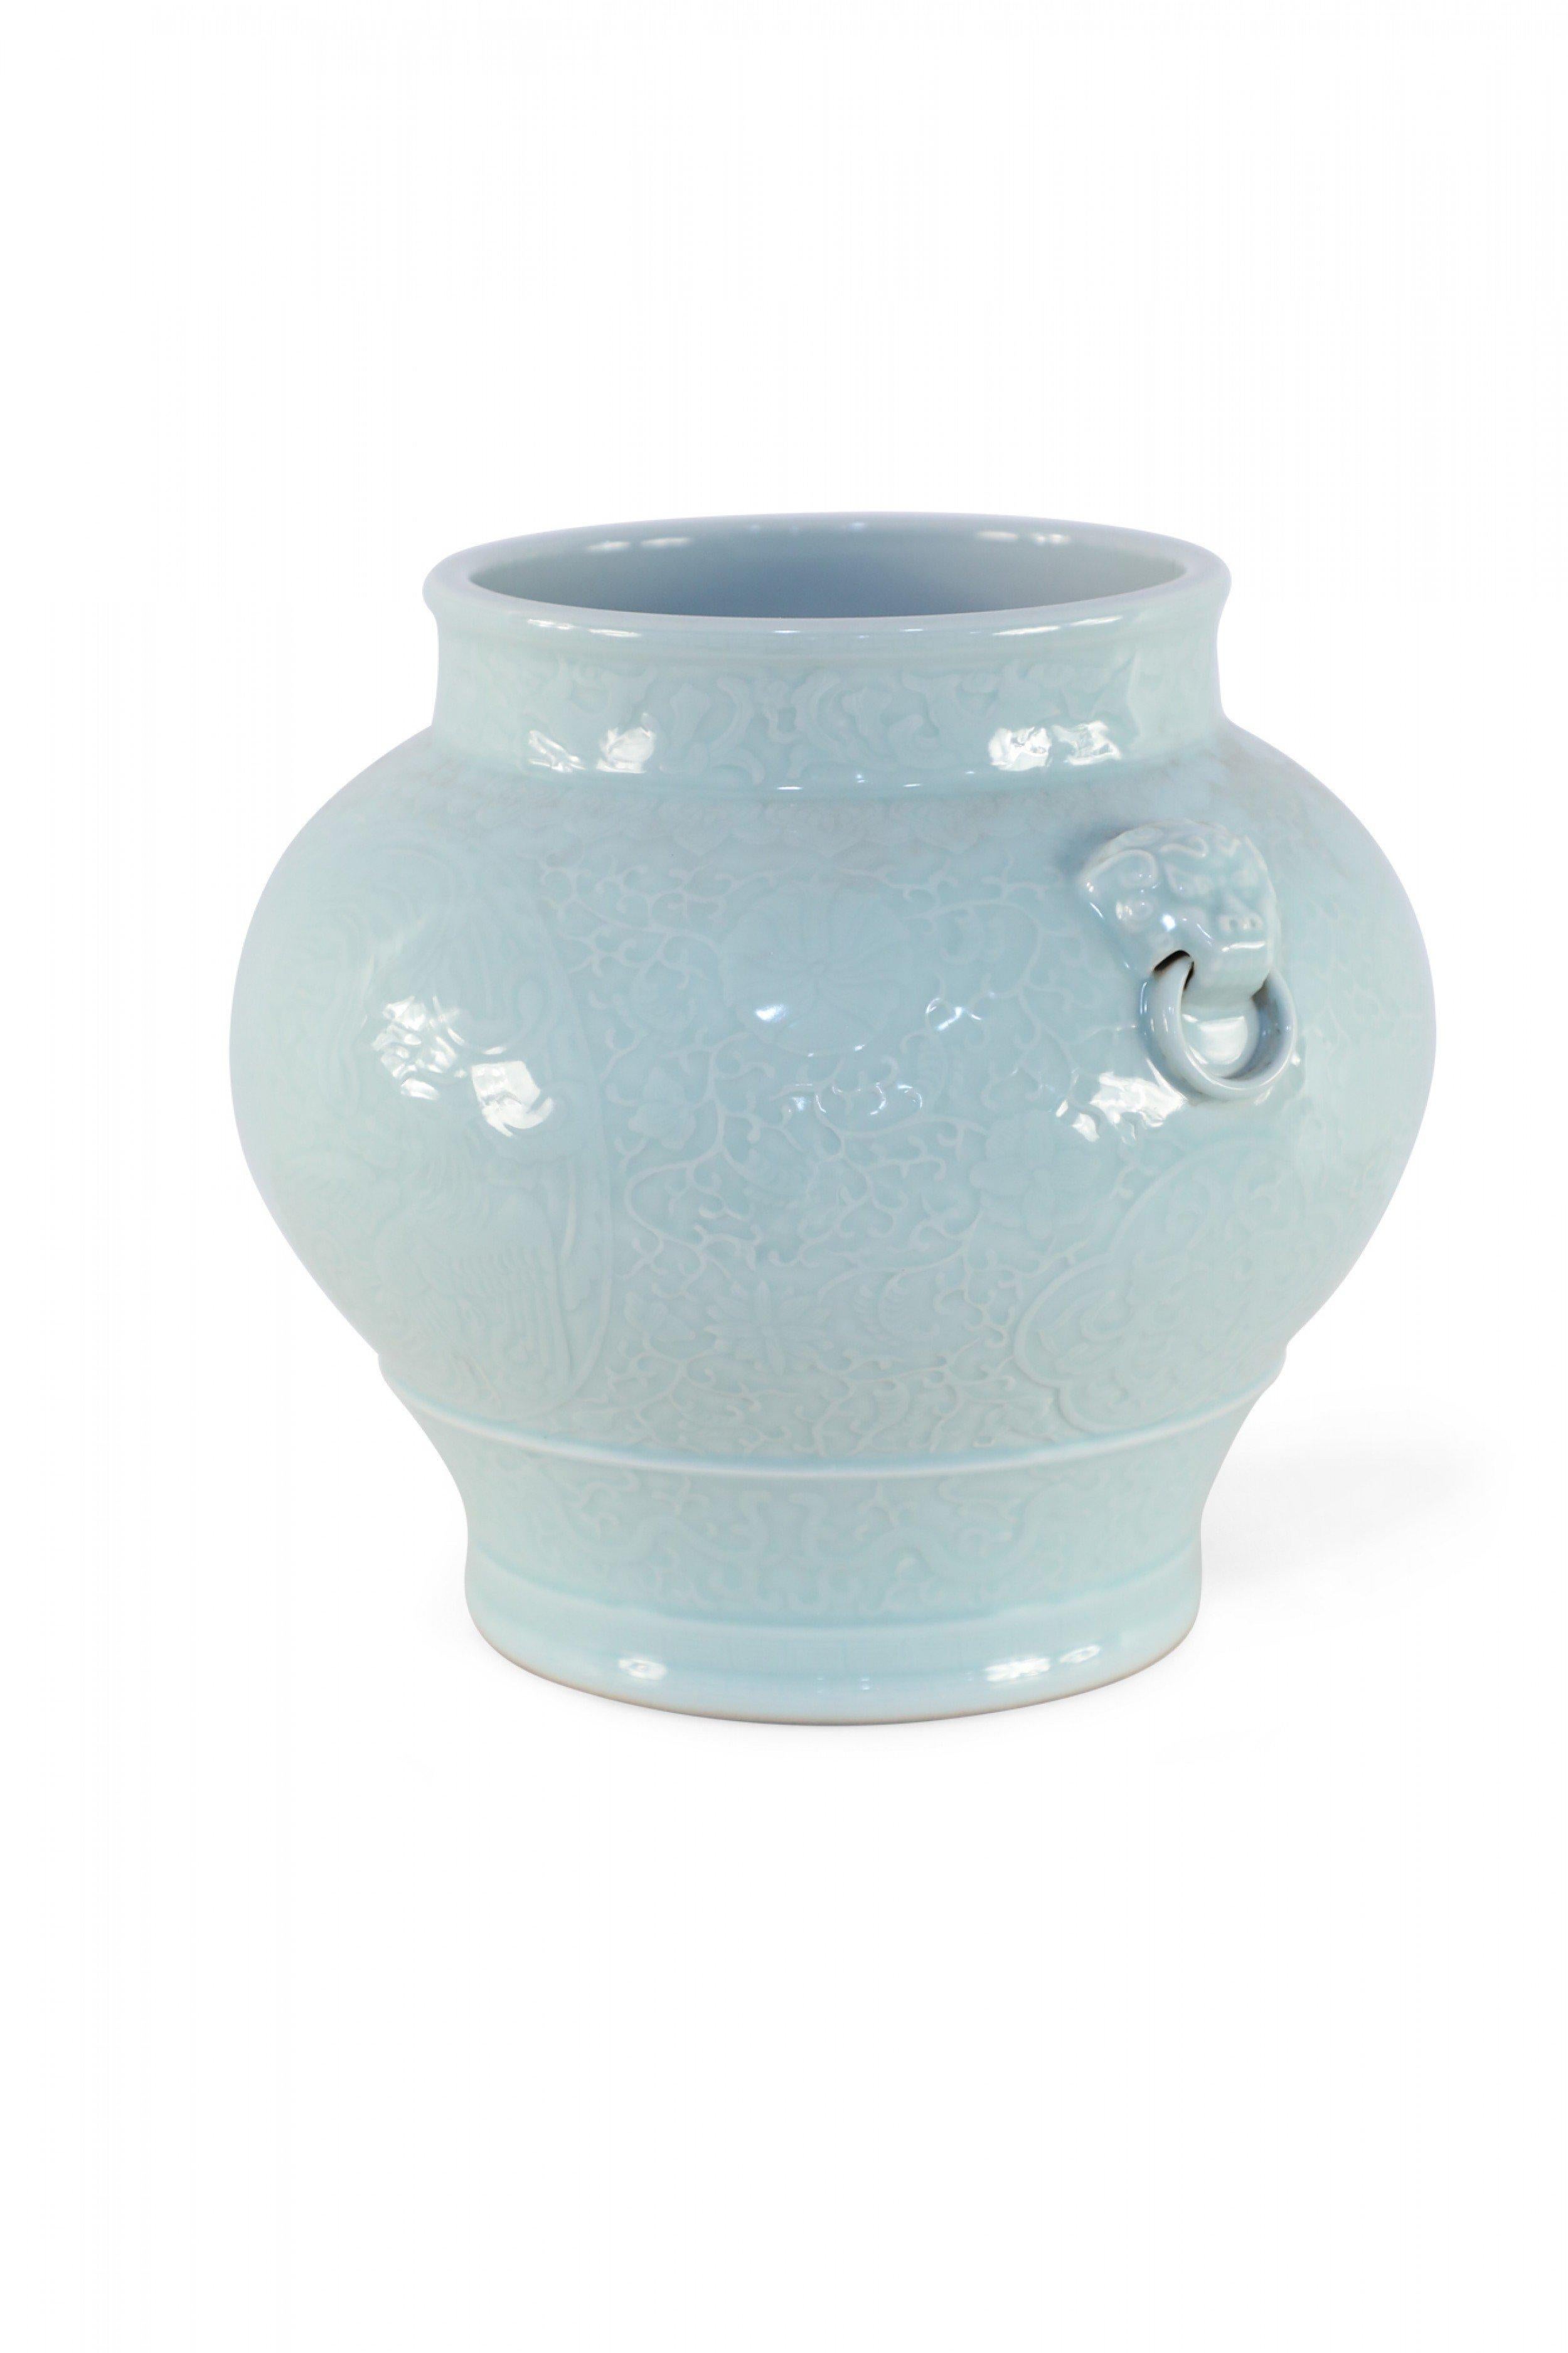 Chinese celadon, porcelain pot decorated with a raised, tonal botanical and dragon design wrapping the entirety of its bulbous form and accented with foo dog door knocker ornamentation along the sides.